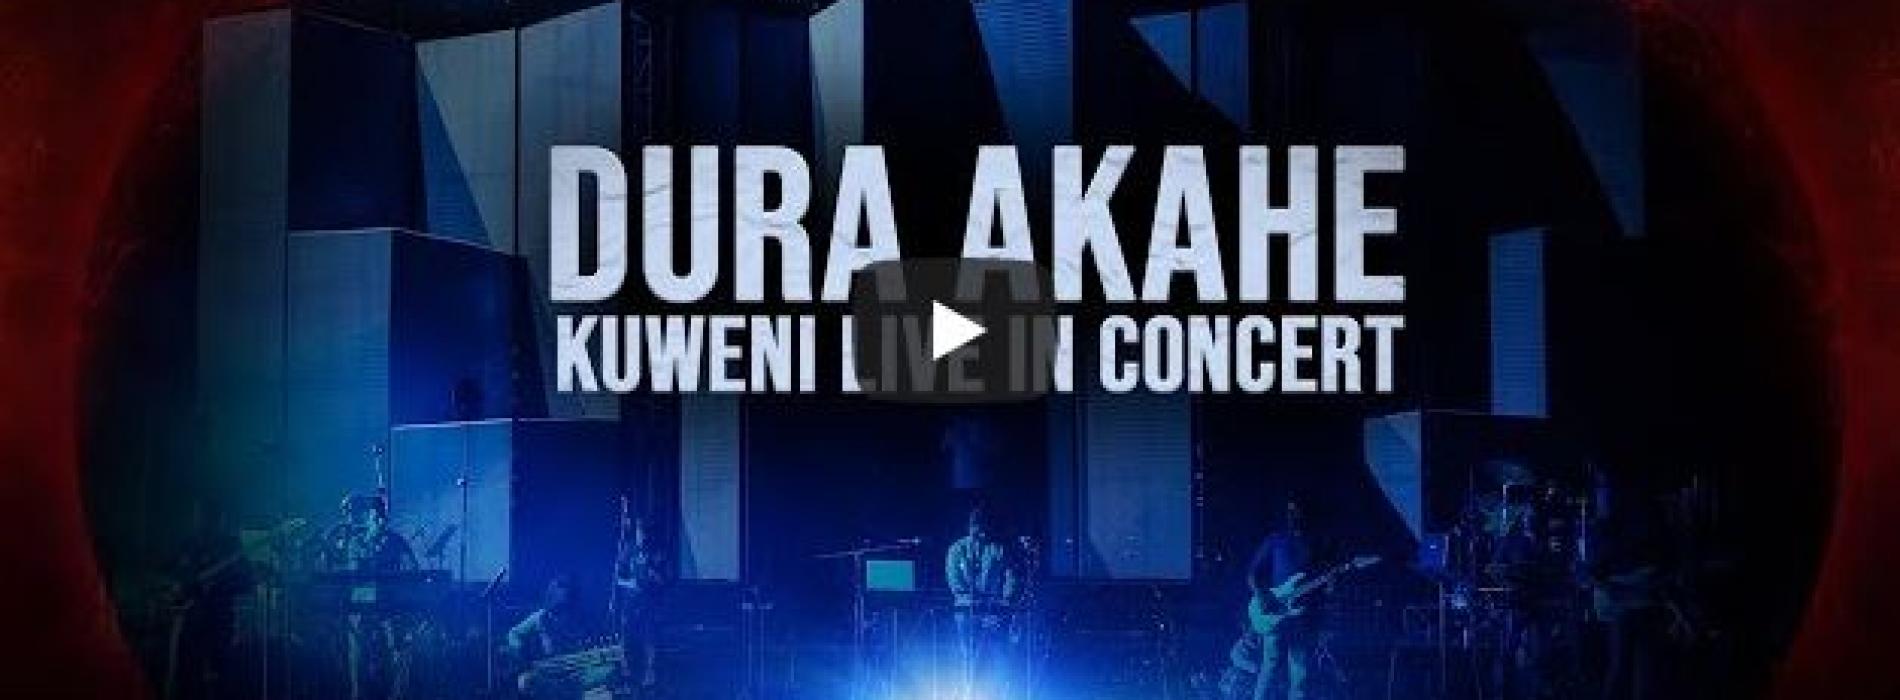 Dura Akahe @ Kuweni Live in Concert – Cinematic Musical Experience by Charitha Attalage (Ft Ravi Jay)